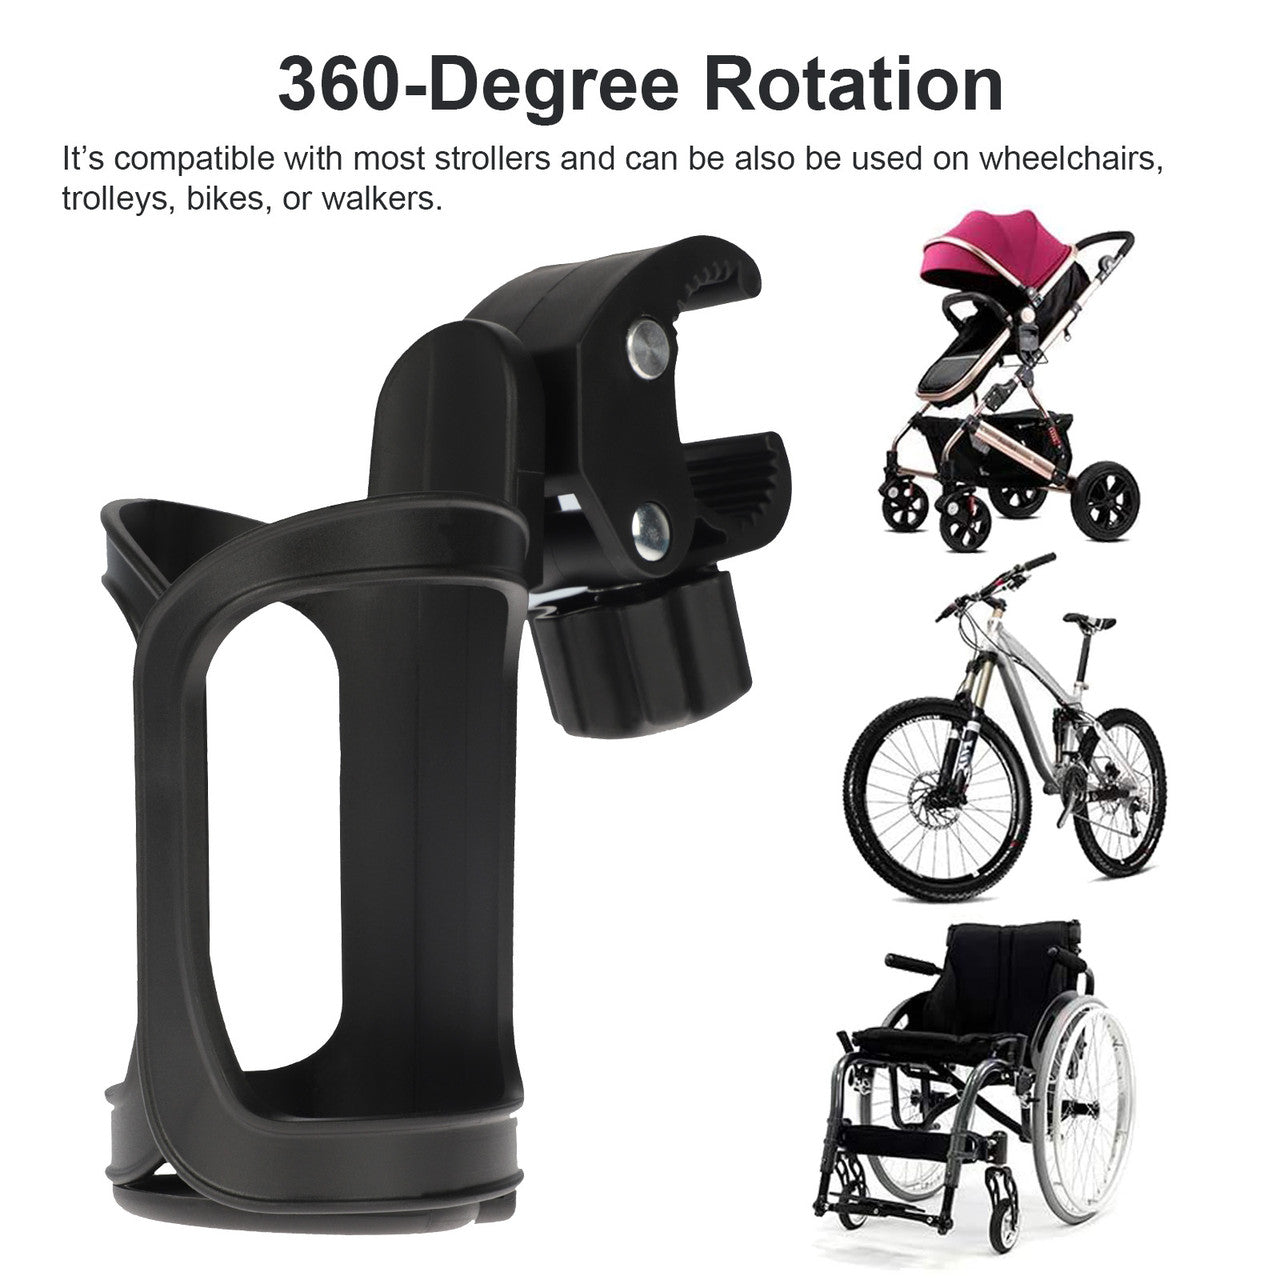 Bike Water Bottle Holder - 360 Degree Rotating Adjustable Motorcycle Bottle Cage for Motorcycle, Baby Stroller, Bicycle Wheelchair (Black)